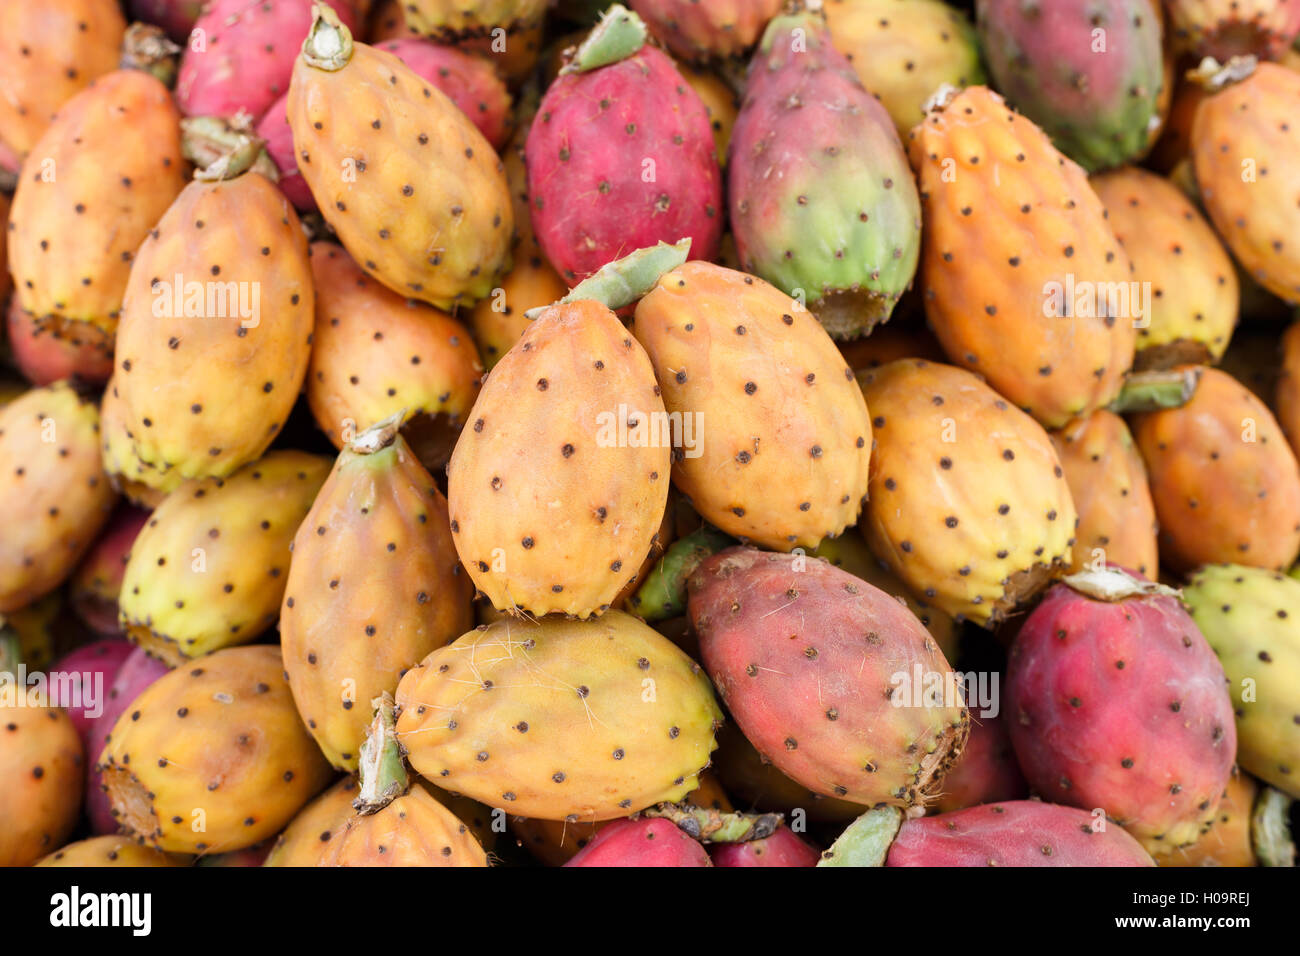 Fresh ripe whole Prickly Pears at the market stall, Sicily Stock Photo